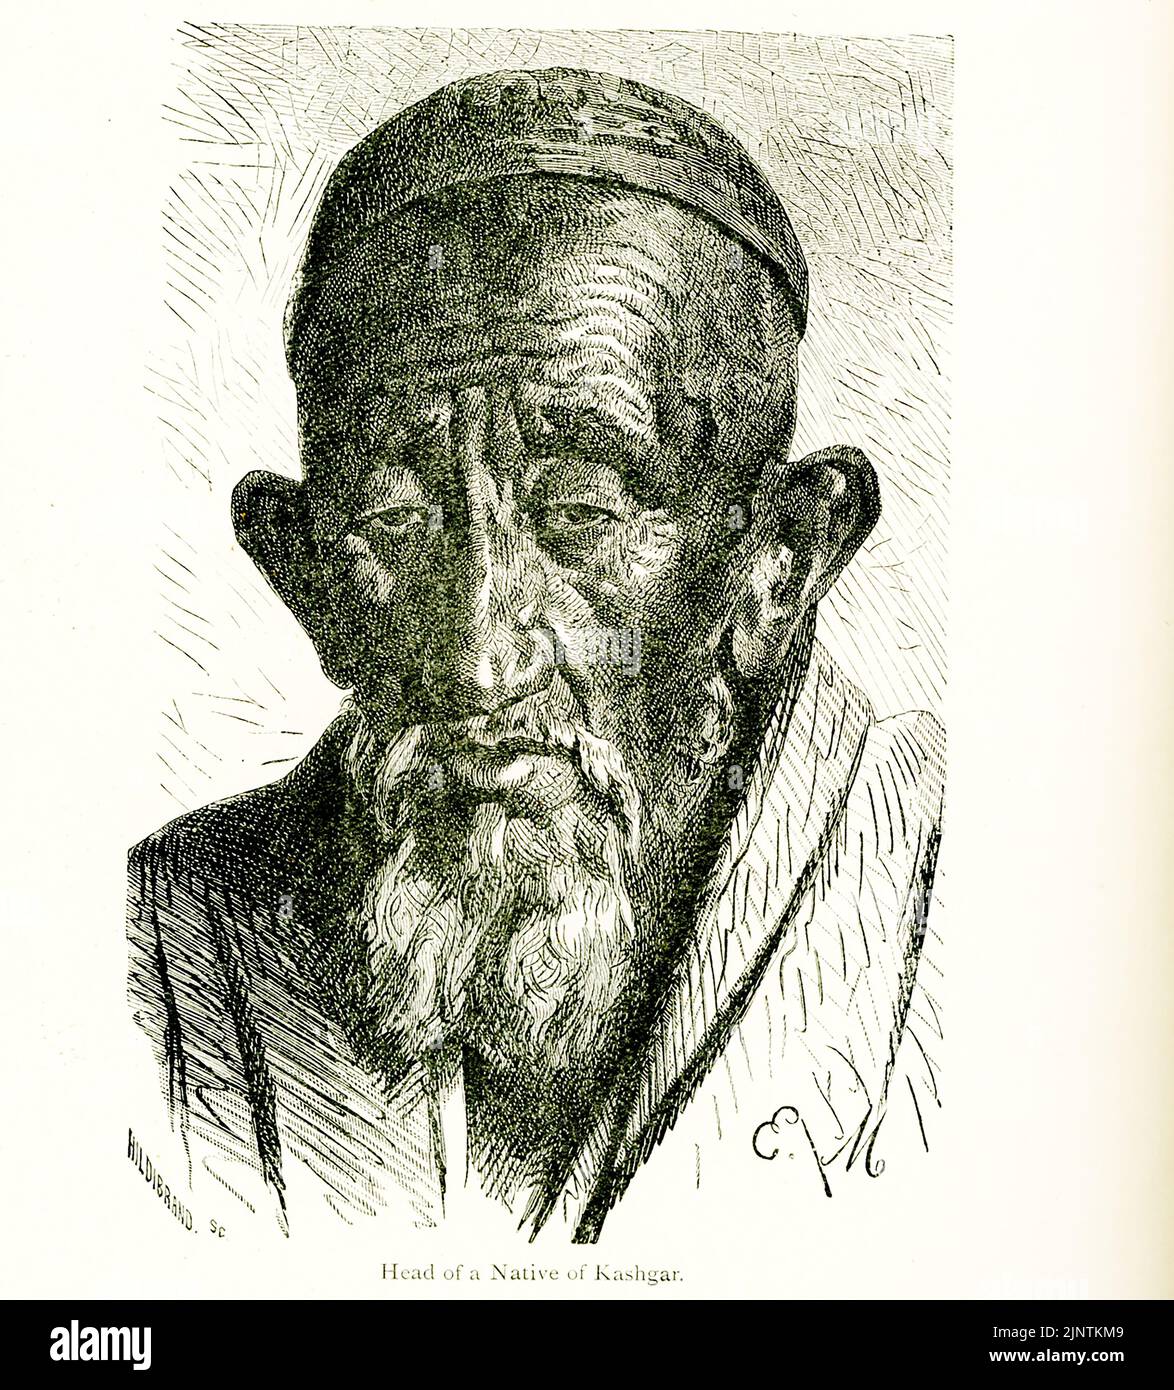 The caption for this map from The Travels of Marco Polo Vol I  as translated by Henry Yule reads: “Head of a native of Kashgar.” Kashgar is a city in the Xinjiang Uyghur Autonomous Region, in China’s far west. It was a stop on the Silk Road. Marco Polo was a Venetian traveler who left Venice, Italy, with his father Niccolo and uncle Maffeo in 1271. He arrived in China in 1275 where Kublai Khan had his court, and returned home in 1294.  Note that the city of Kinsai, the so-called 'Heavenly City,' was called by Marco Polo Coromoran. Kanbaliq is Turkic for what is today Beijing. Polo called it Ca Stock Photo